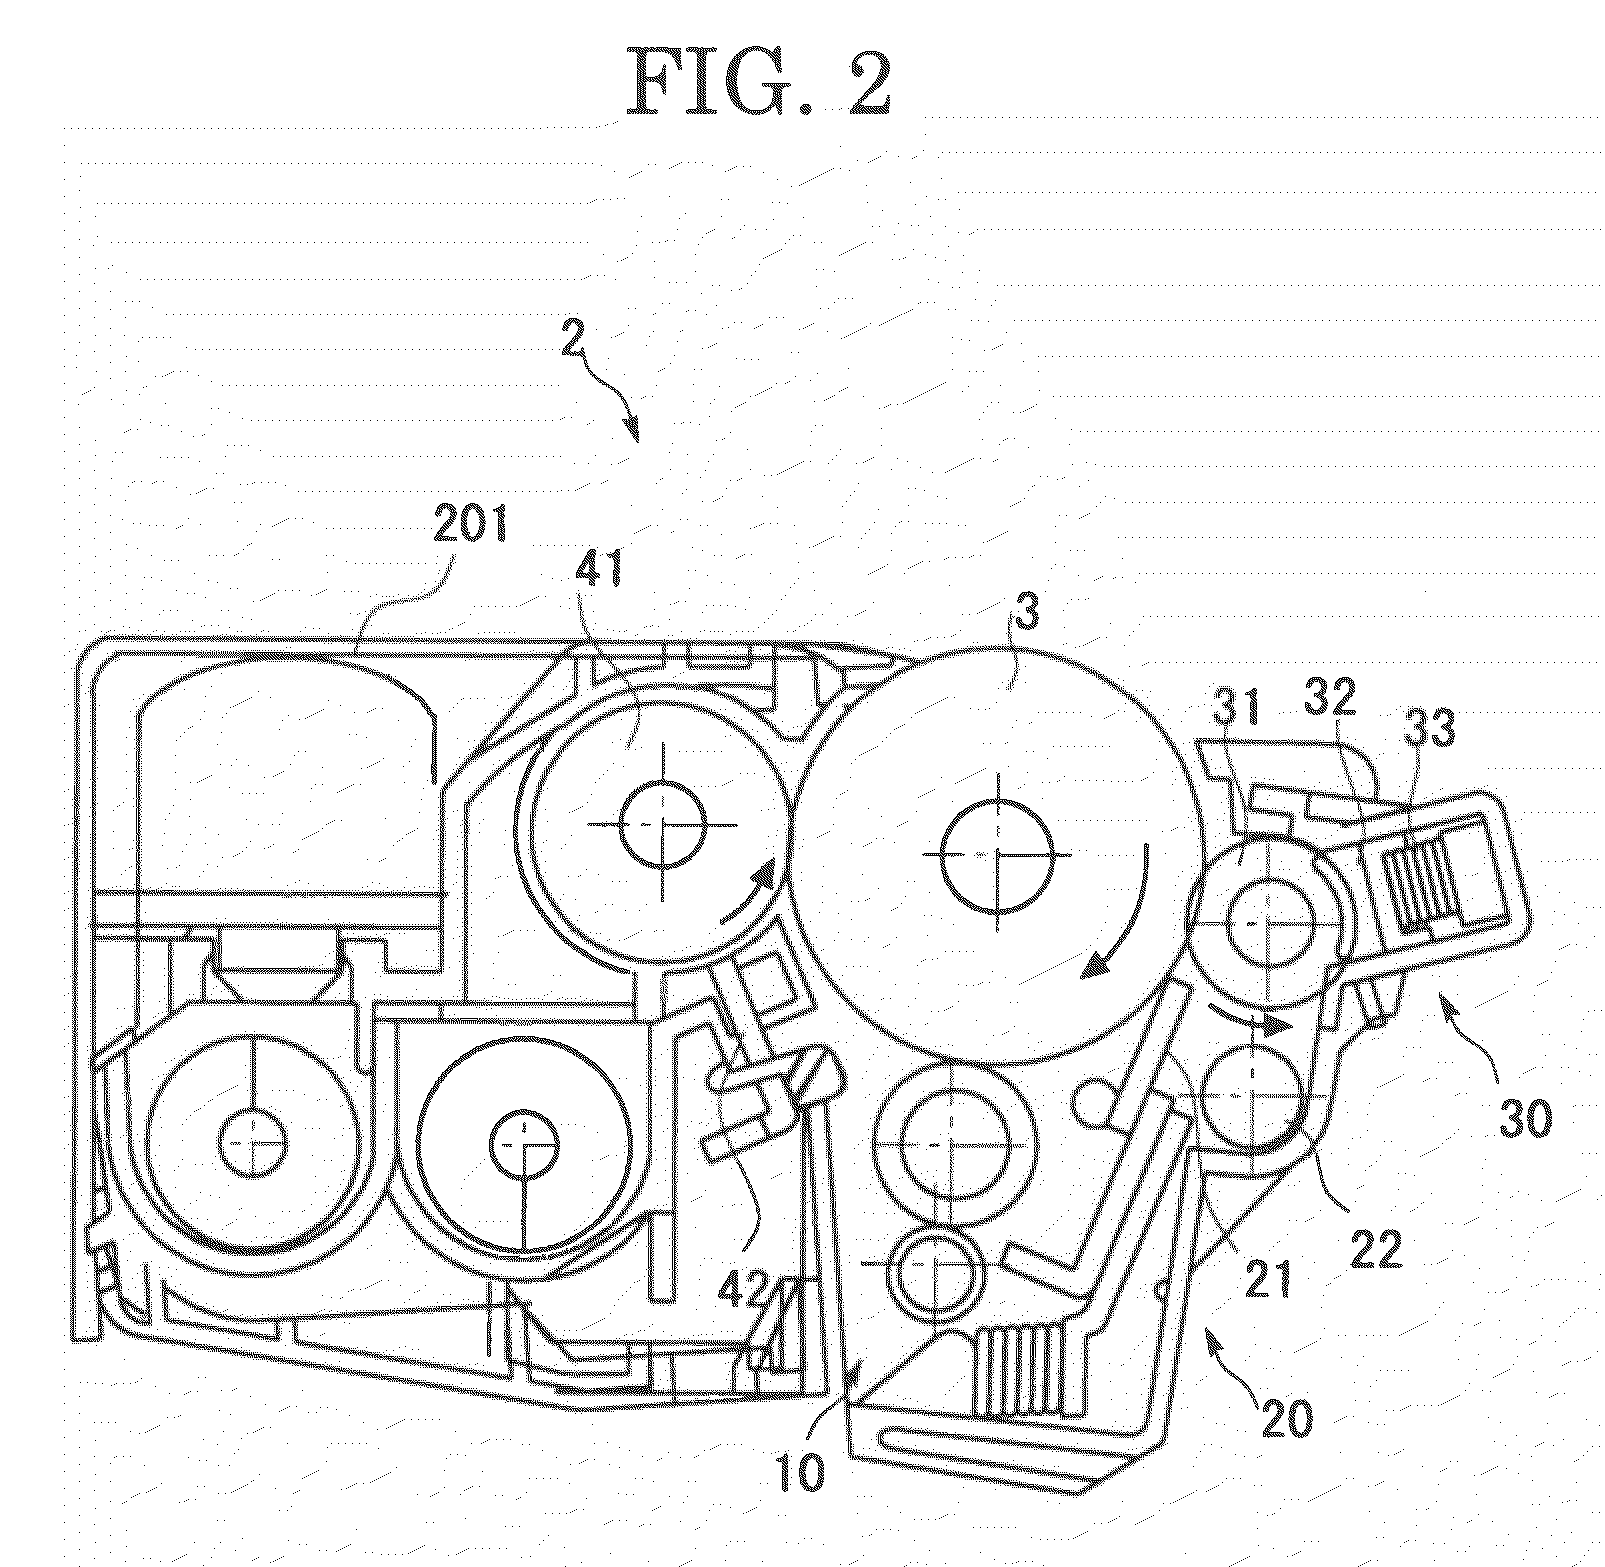 Toner and method for producing the same